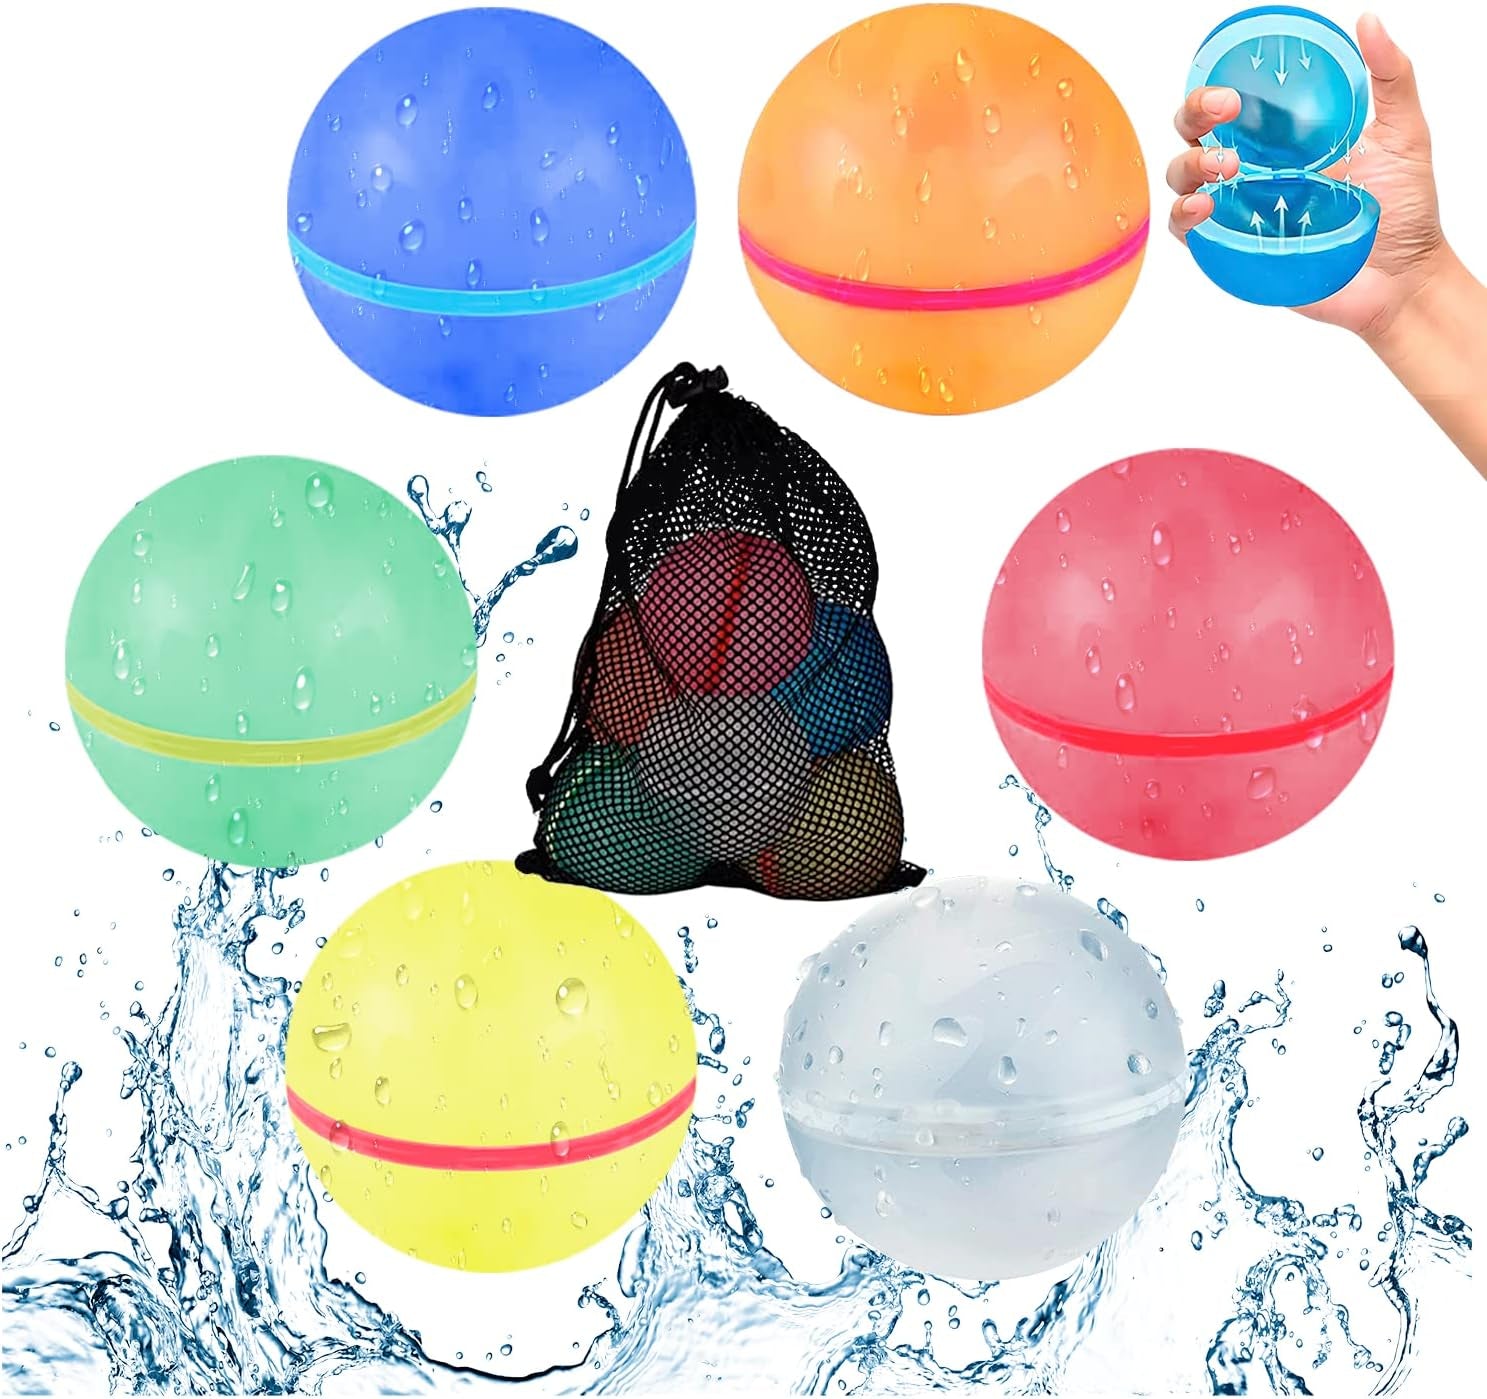 Self Sealing Reusable Water Balloons 20PCS Magnetic Water Balloons Quick Filling Water Balls Toys Silicone Water Splash Ball Water Bomb Cool Toys,Summer Pool Beach Outdoor Toys for Kids Ages 3 4 8 12+